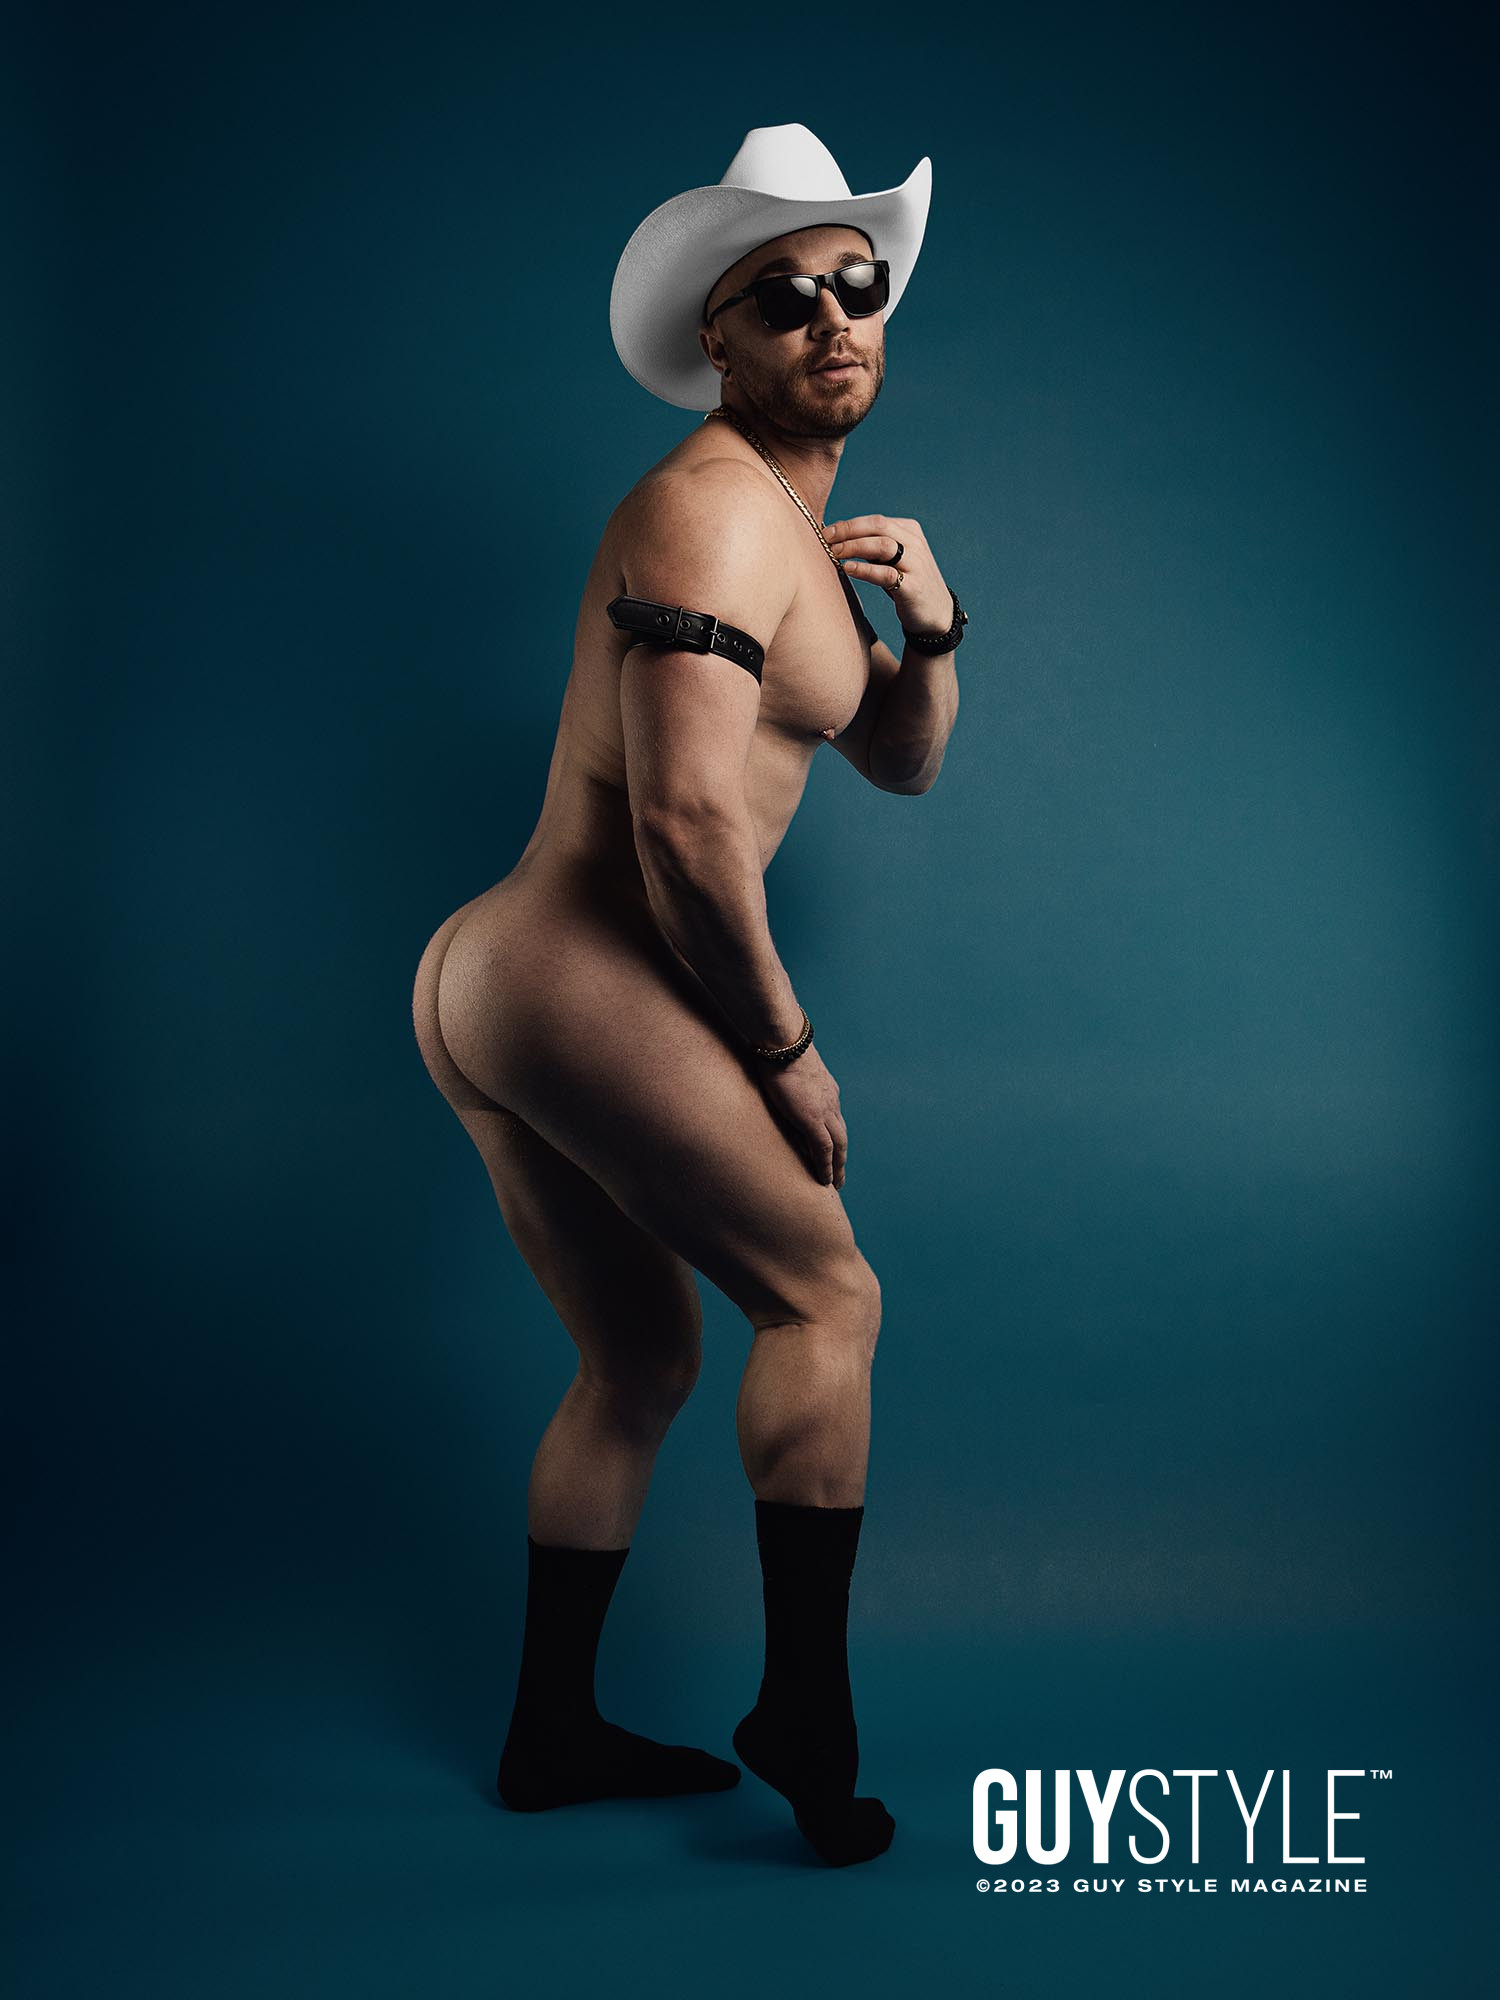 Teal Temptation – NYC Male Boudoir Experience Photoshoot Starring Cocky Cowboy